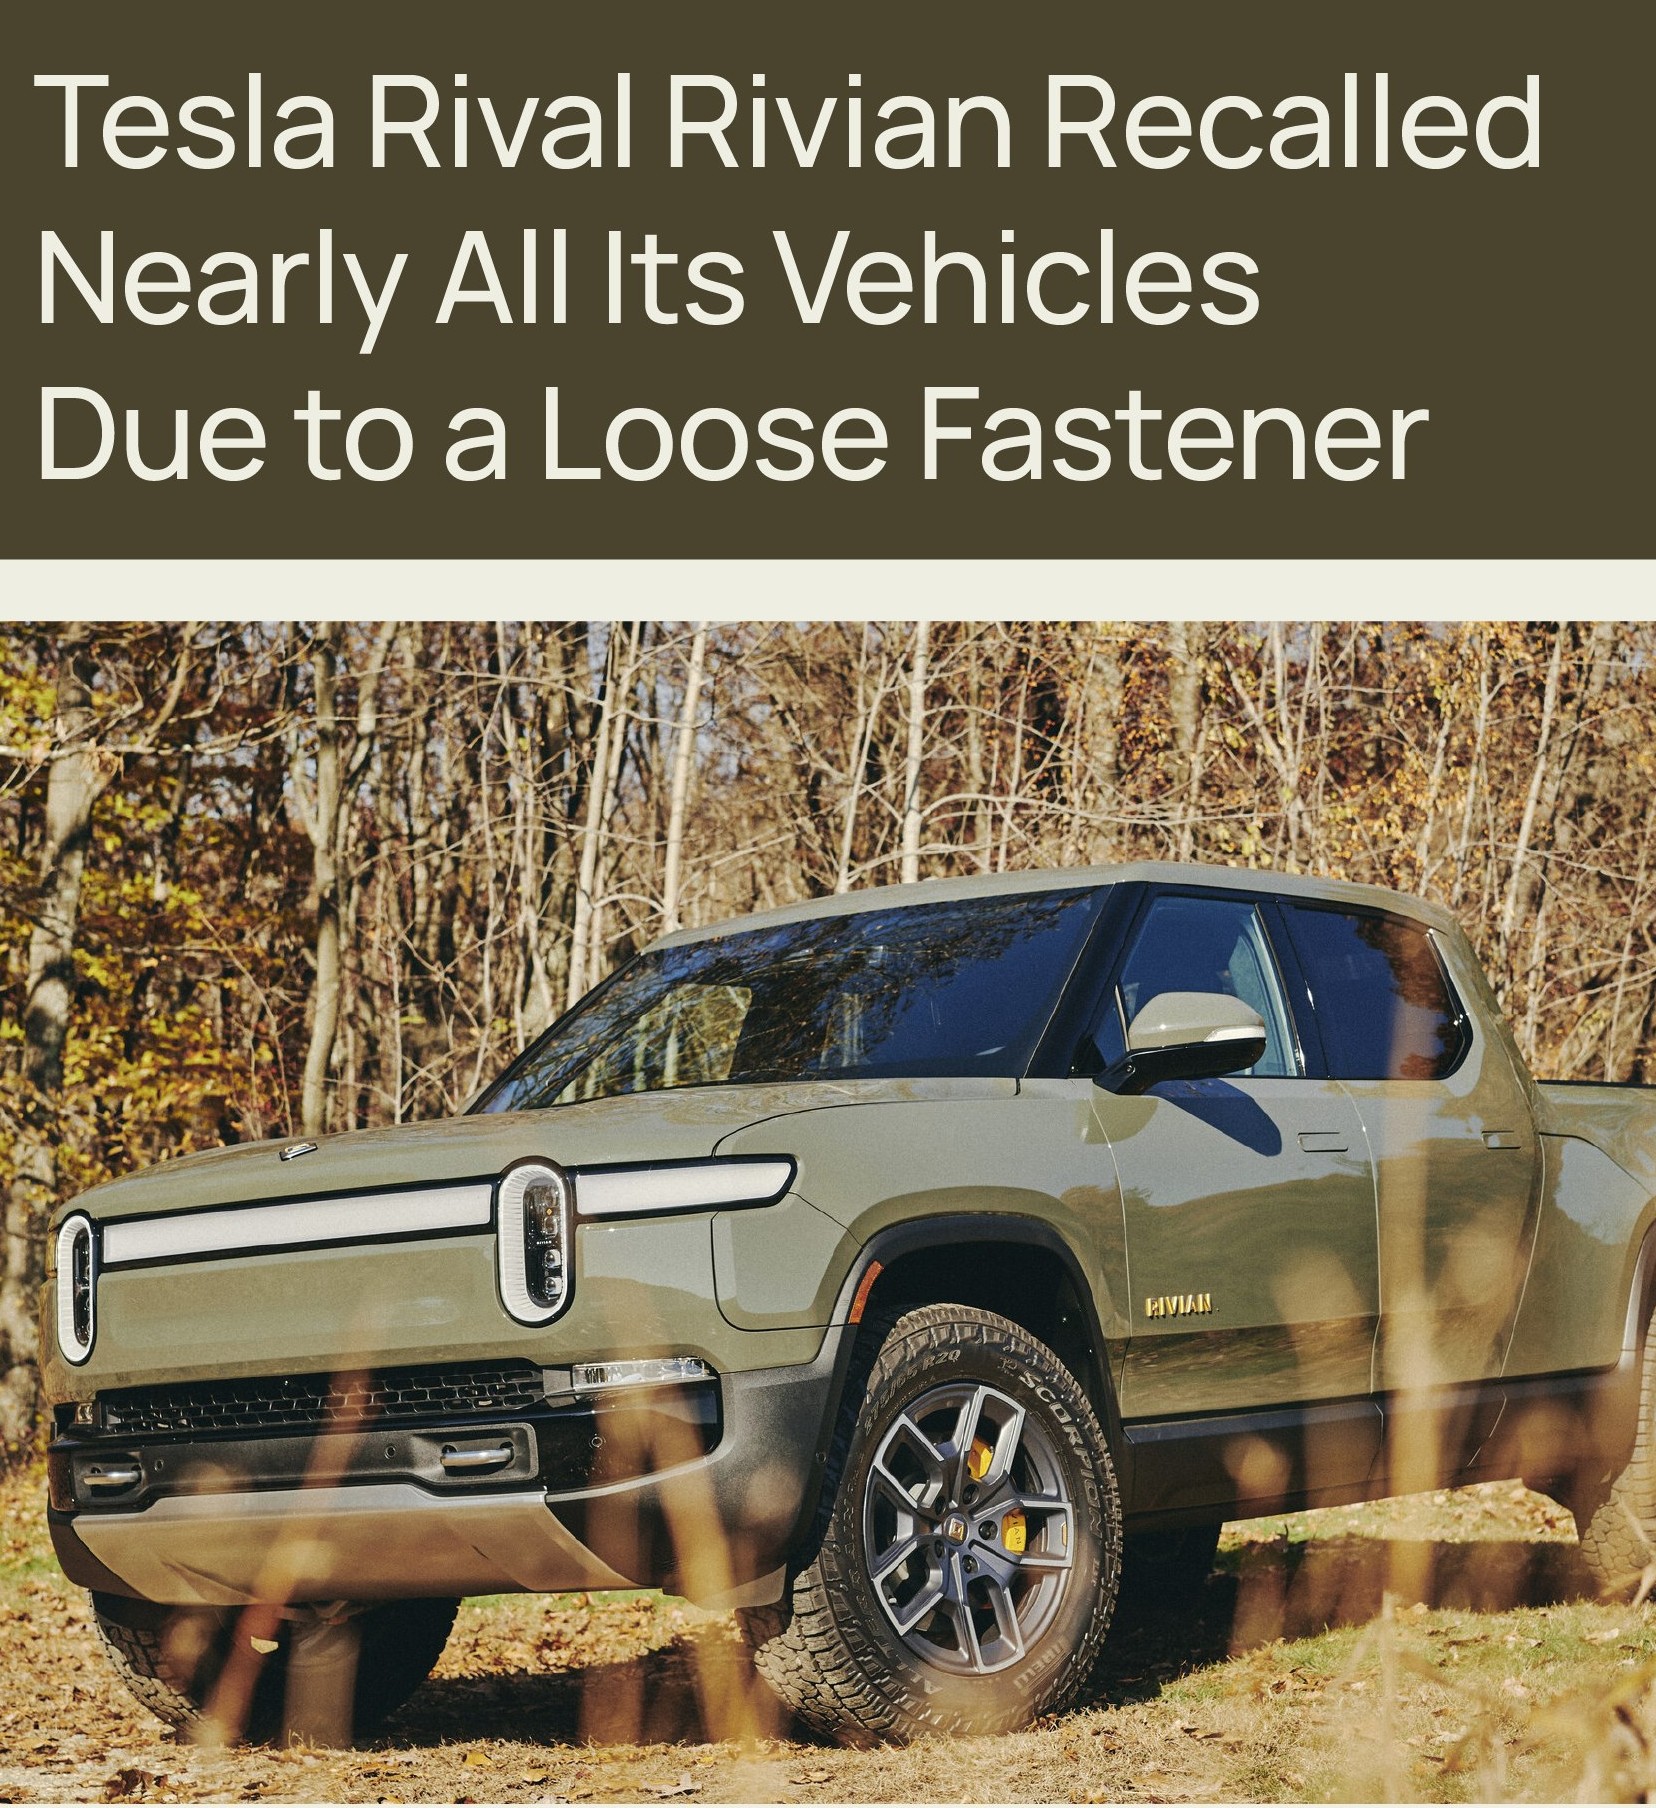 Tesla Rival Rivian Recalled Nearly All ITs Vehicles